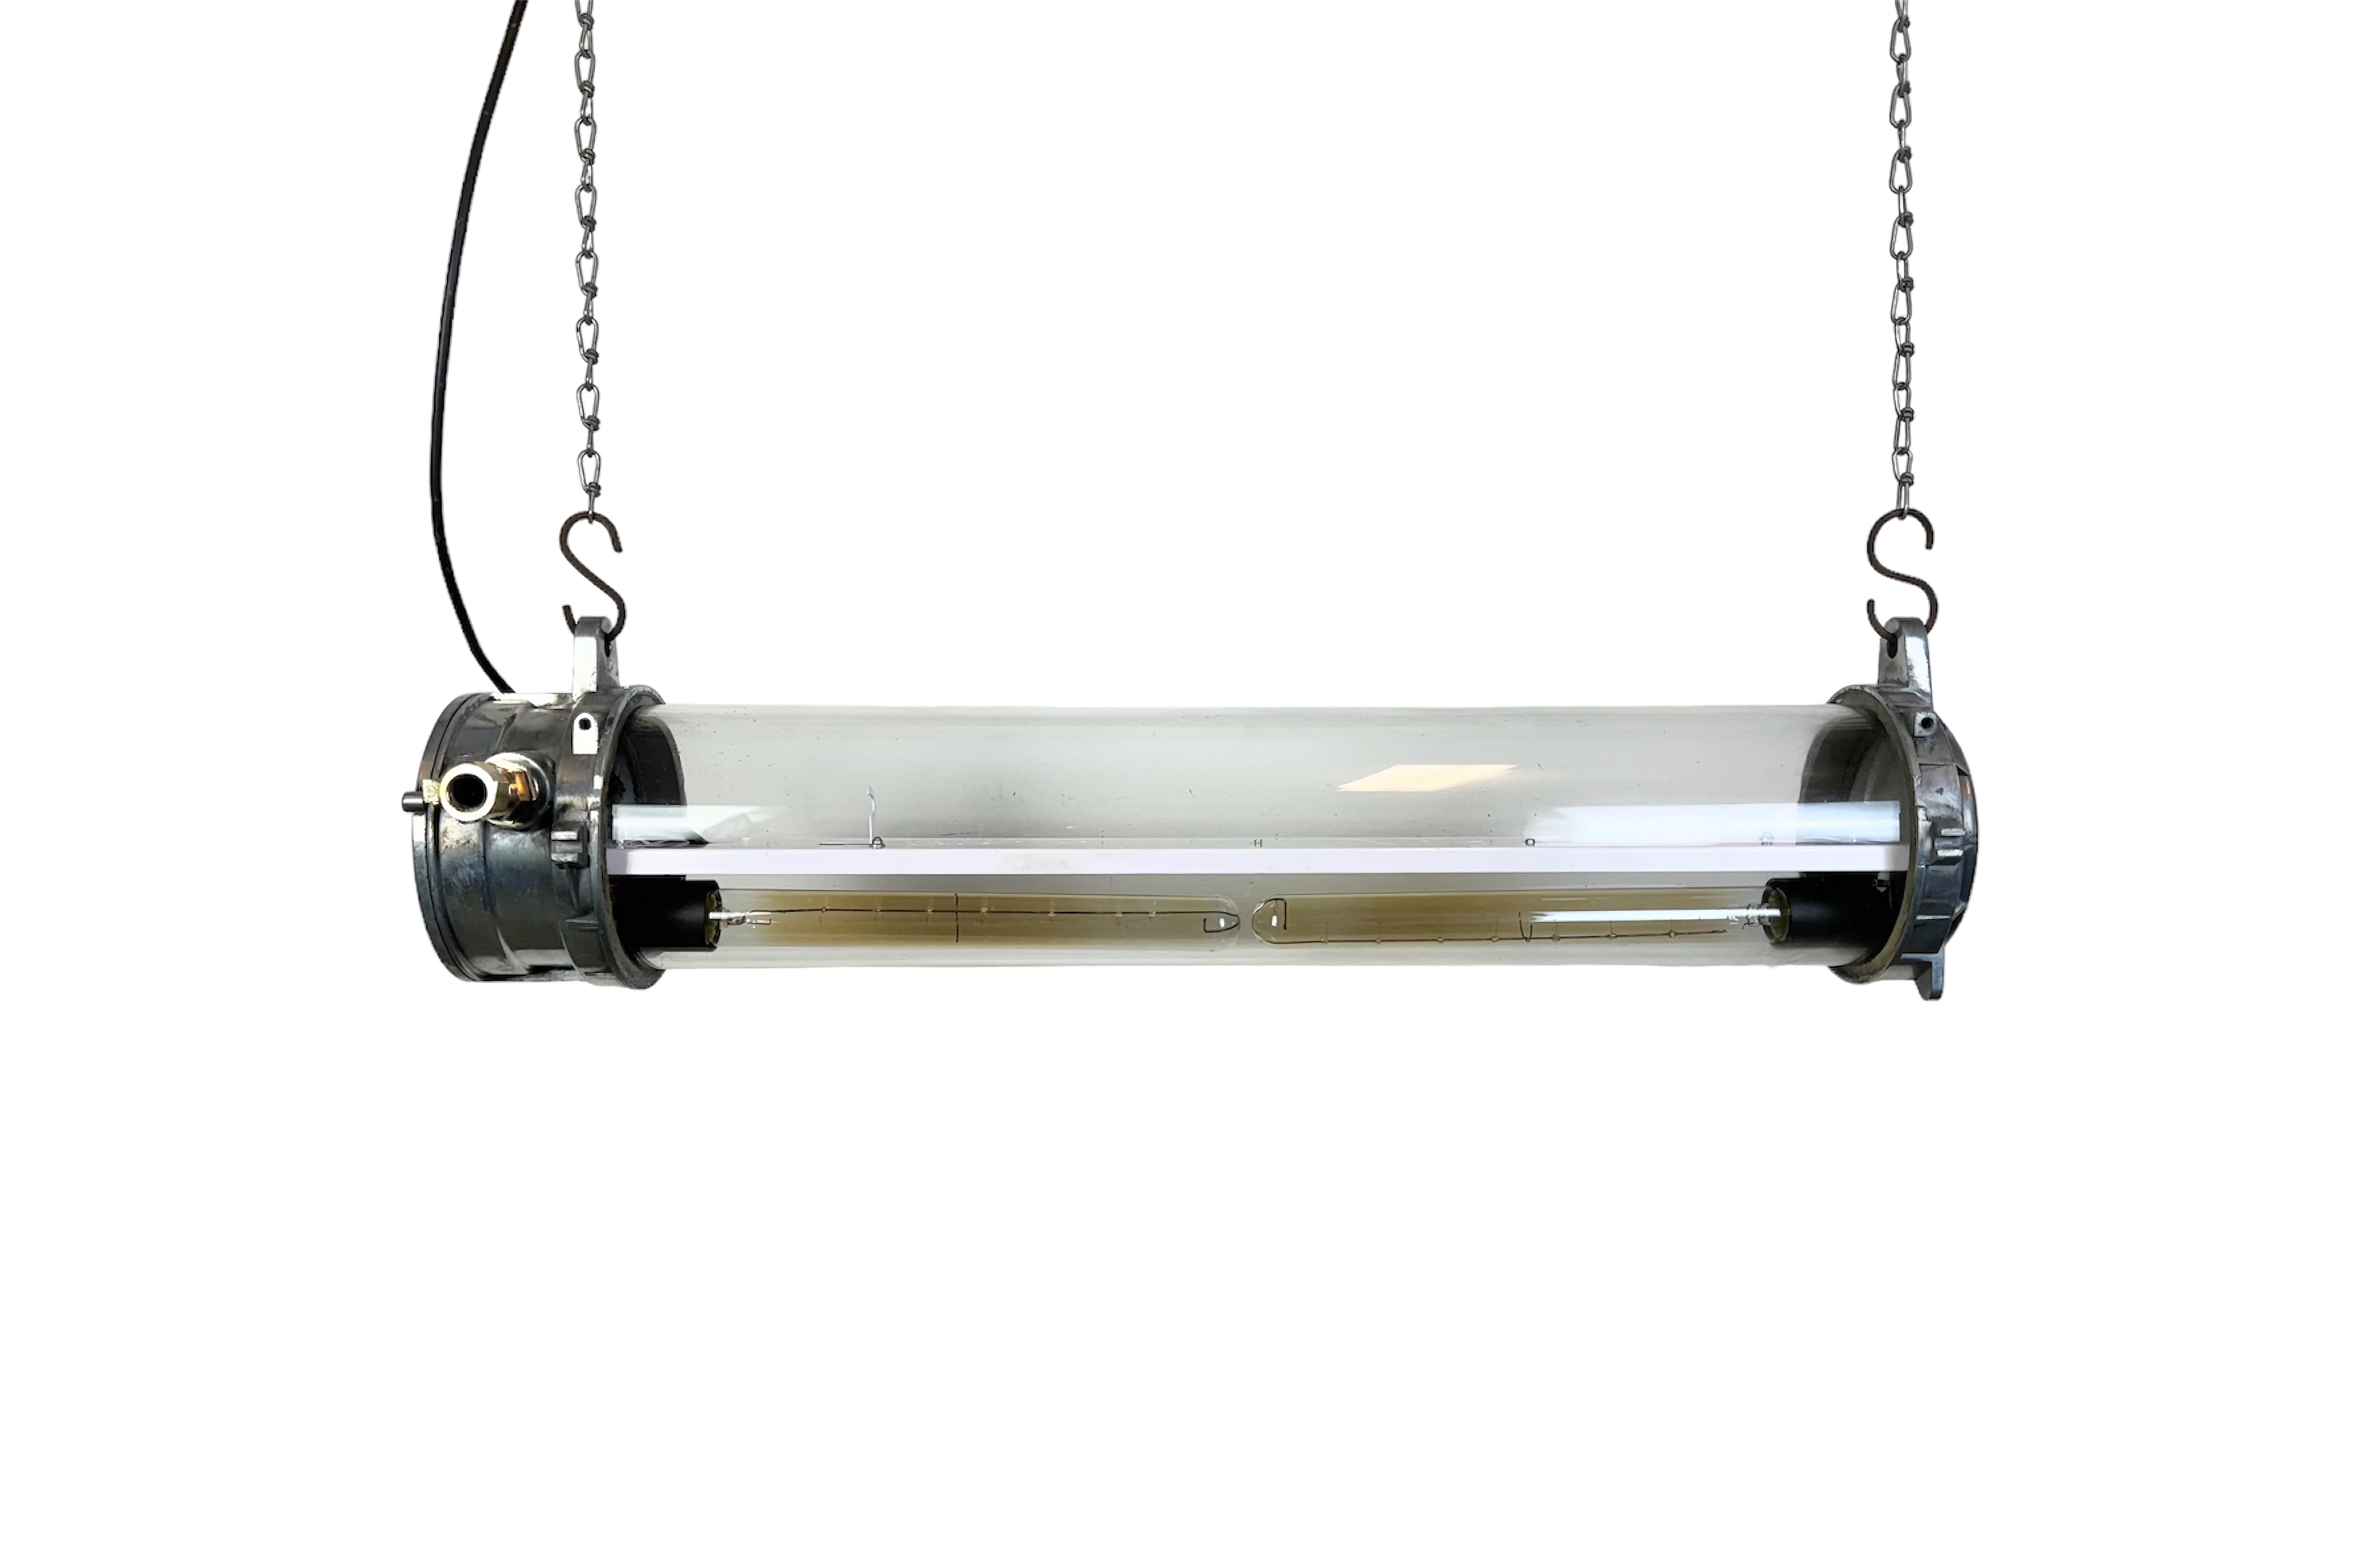 This industrial tube light was made by A.T.X Amiens-France during the 1970s. It is made of an aluminium and a glass tube. The light requires two E27/ E26 light bulbs. The weight of the lamp is 7,6 kg. Two Edison light bulbs are supplied with the